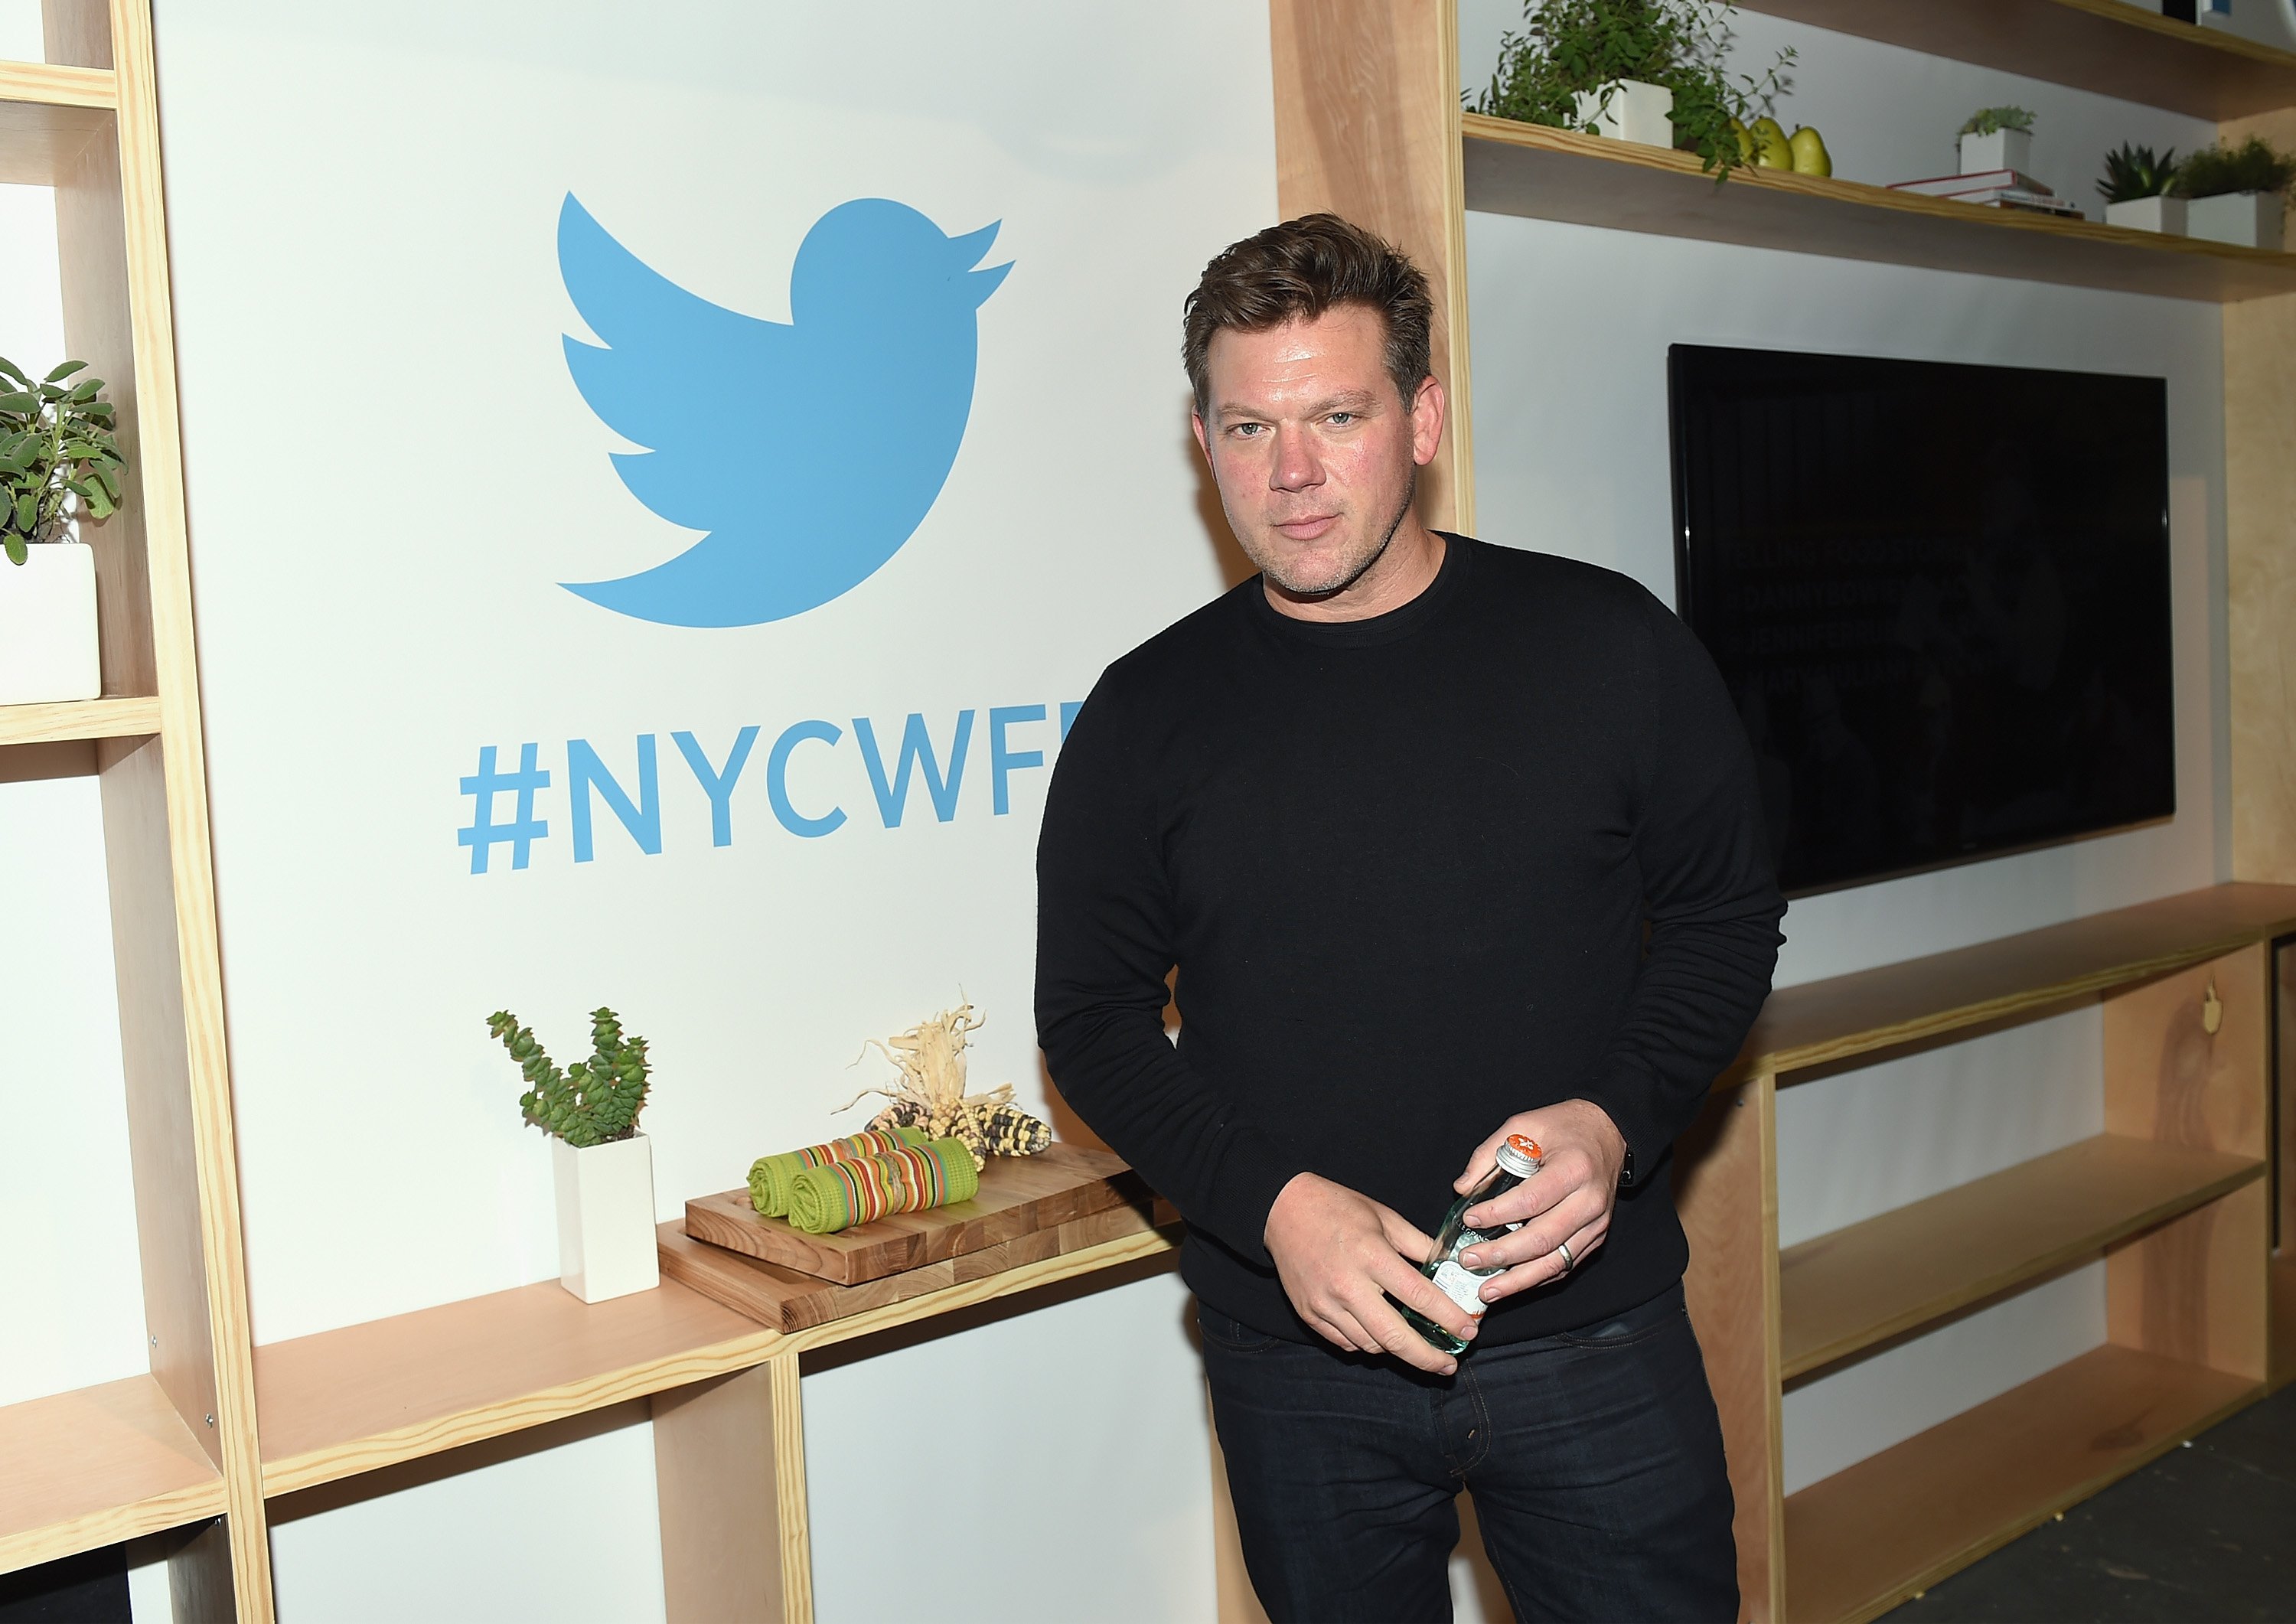 Food Network star Tyler Florence wears a long-sleeved dark top in this 2015 photo.